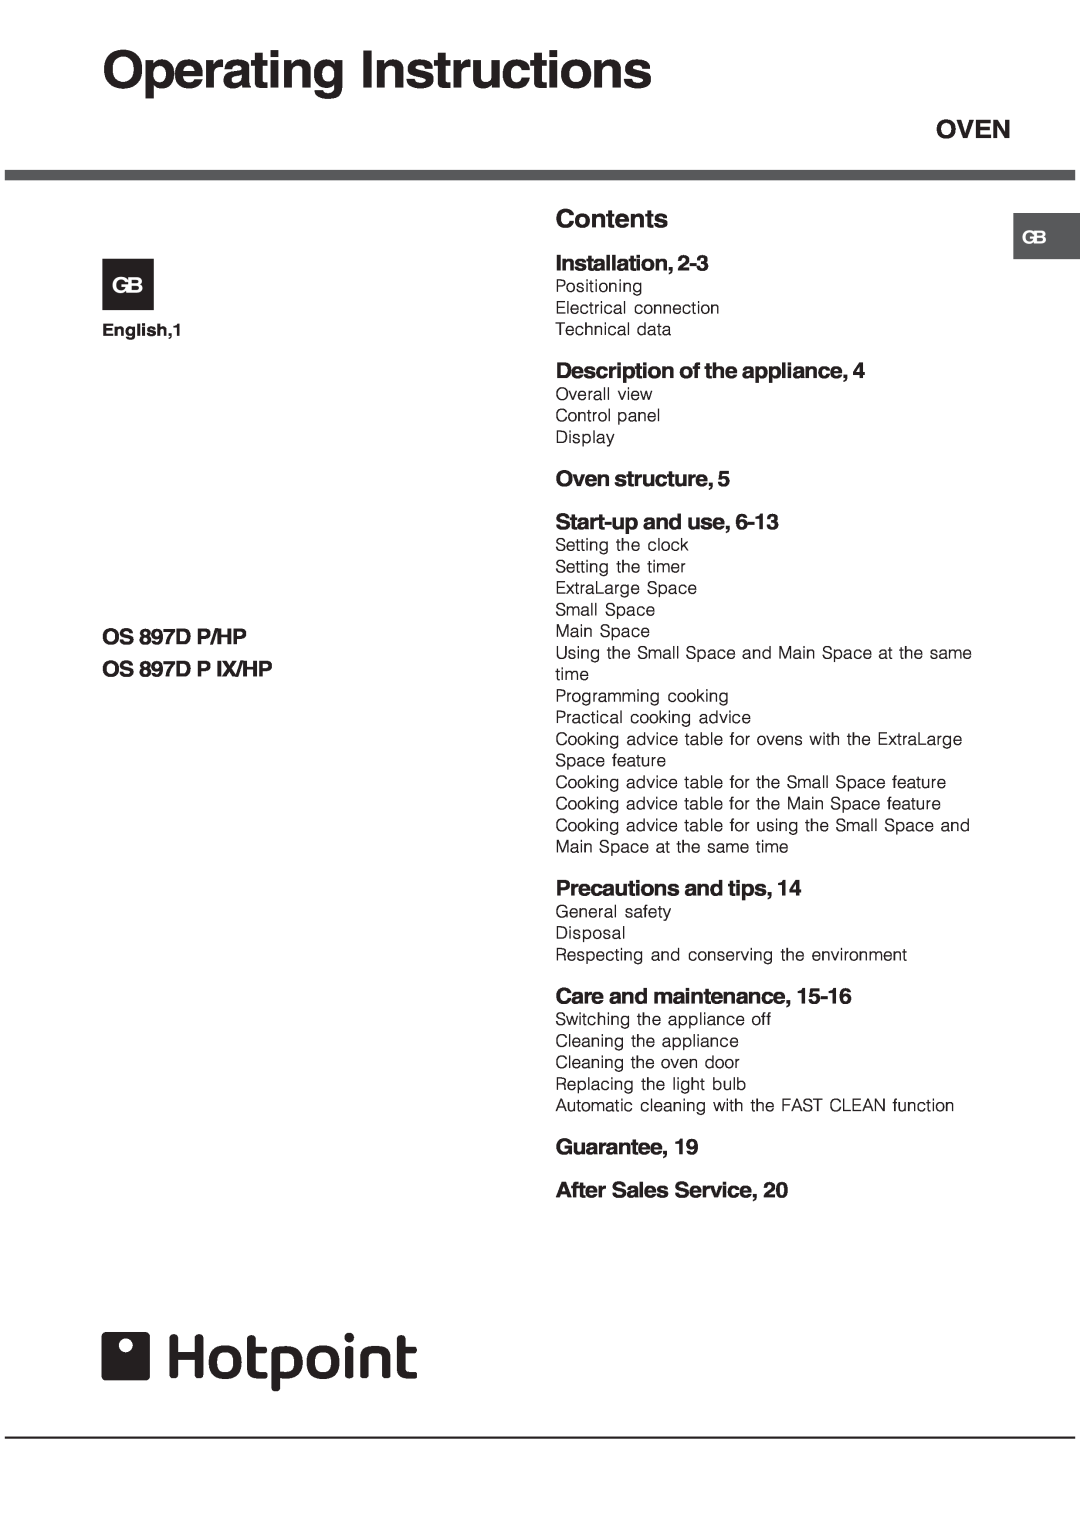 Hotpoint manual Operating Instructions, Installation, Description of the appliance, OS 897D P/HP OS 897D P IX/HP, Oven 